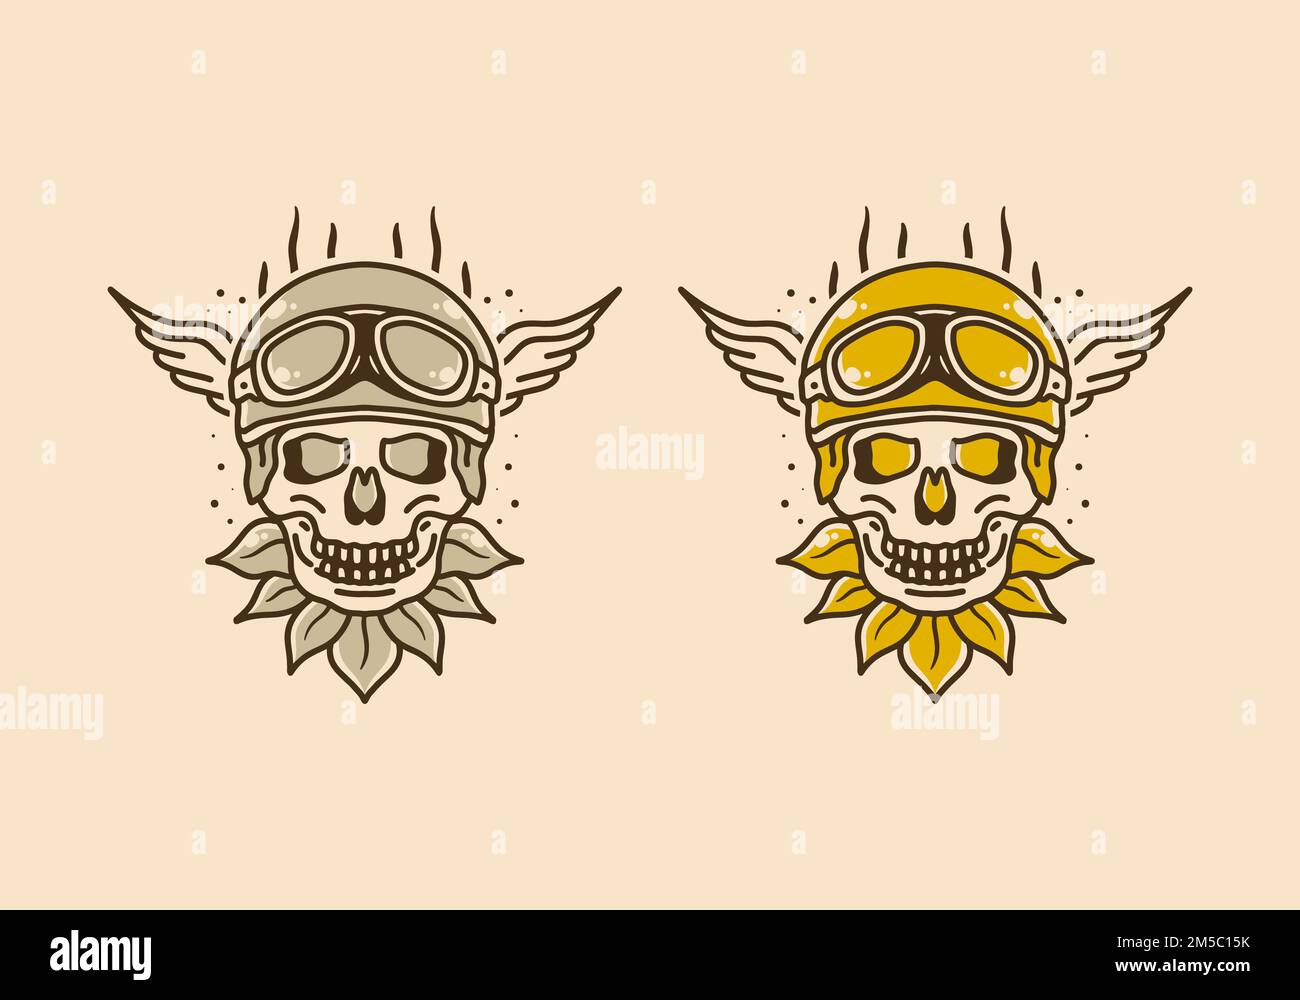 Vintage art illustration design of skull wearing a helmet and goggles with wings on the sides Stock Vector